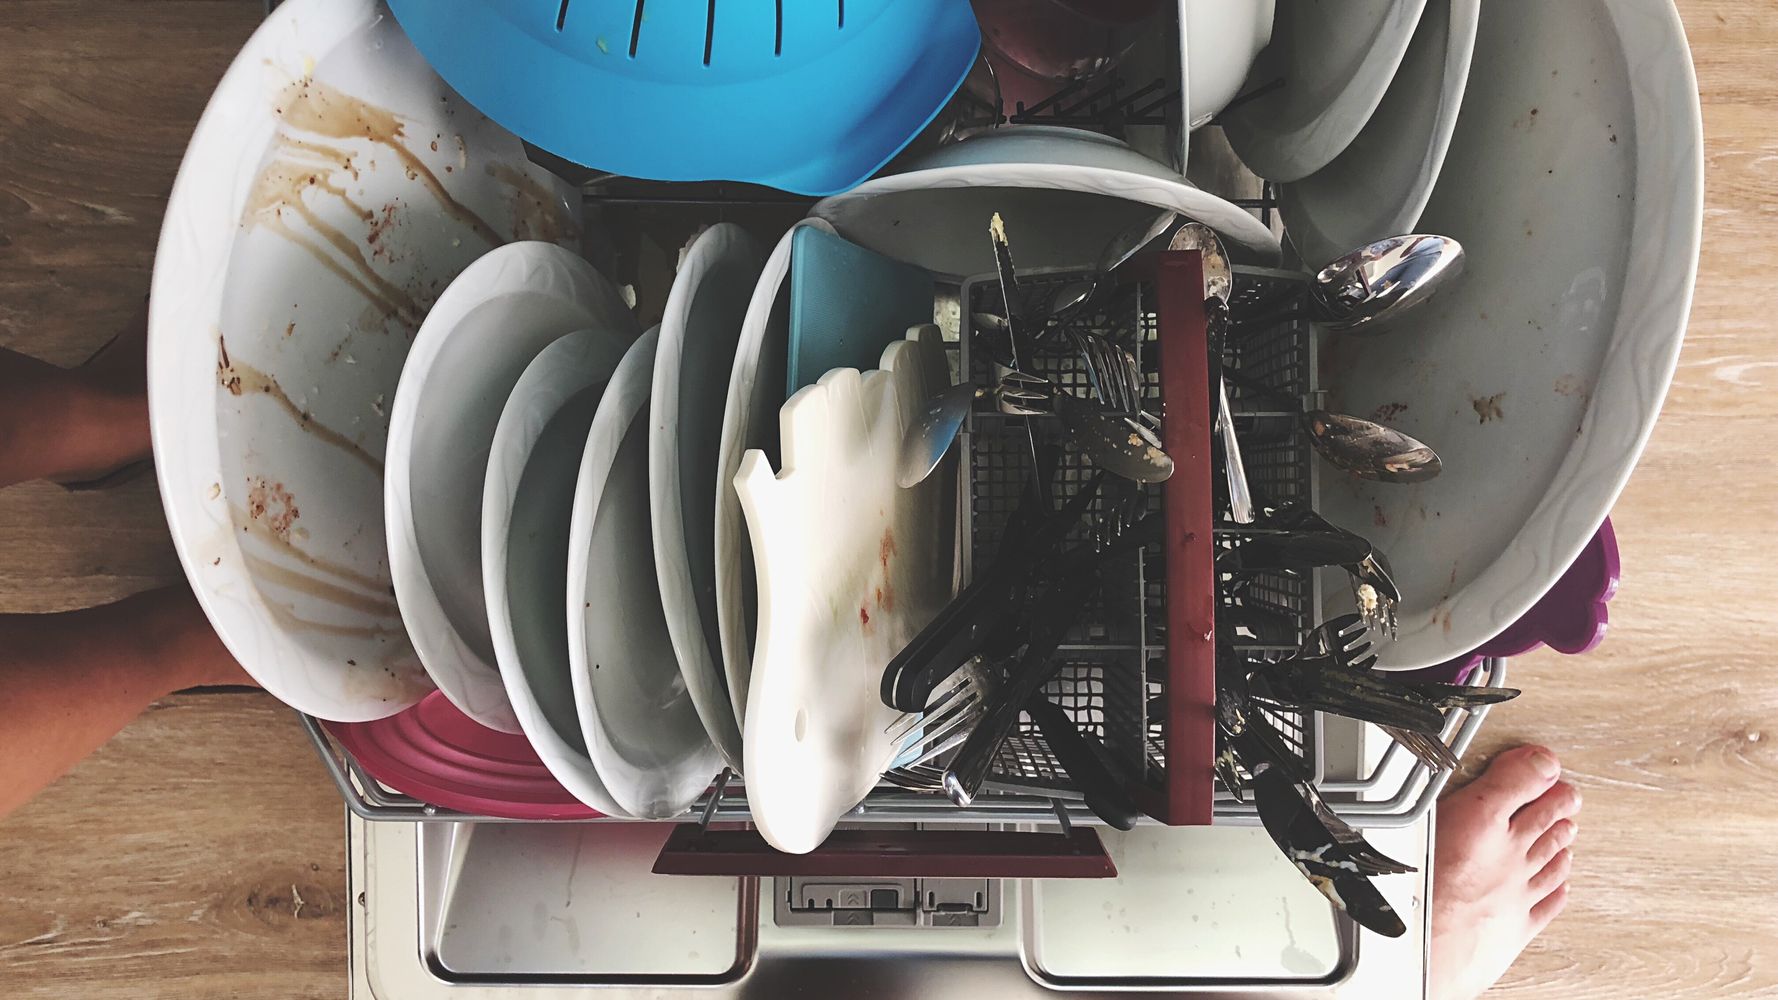 Do Dishwashers Use Hot Water or Heat Their Own?